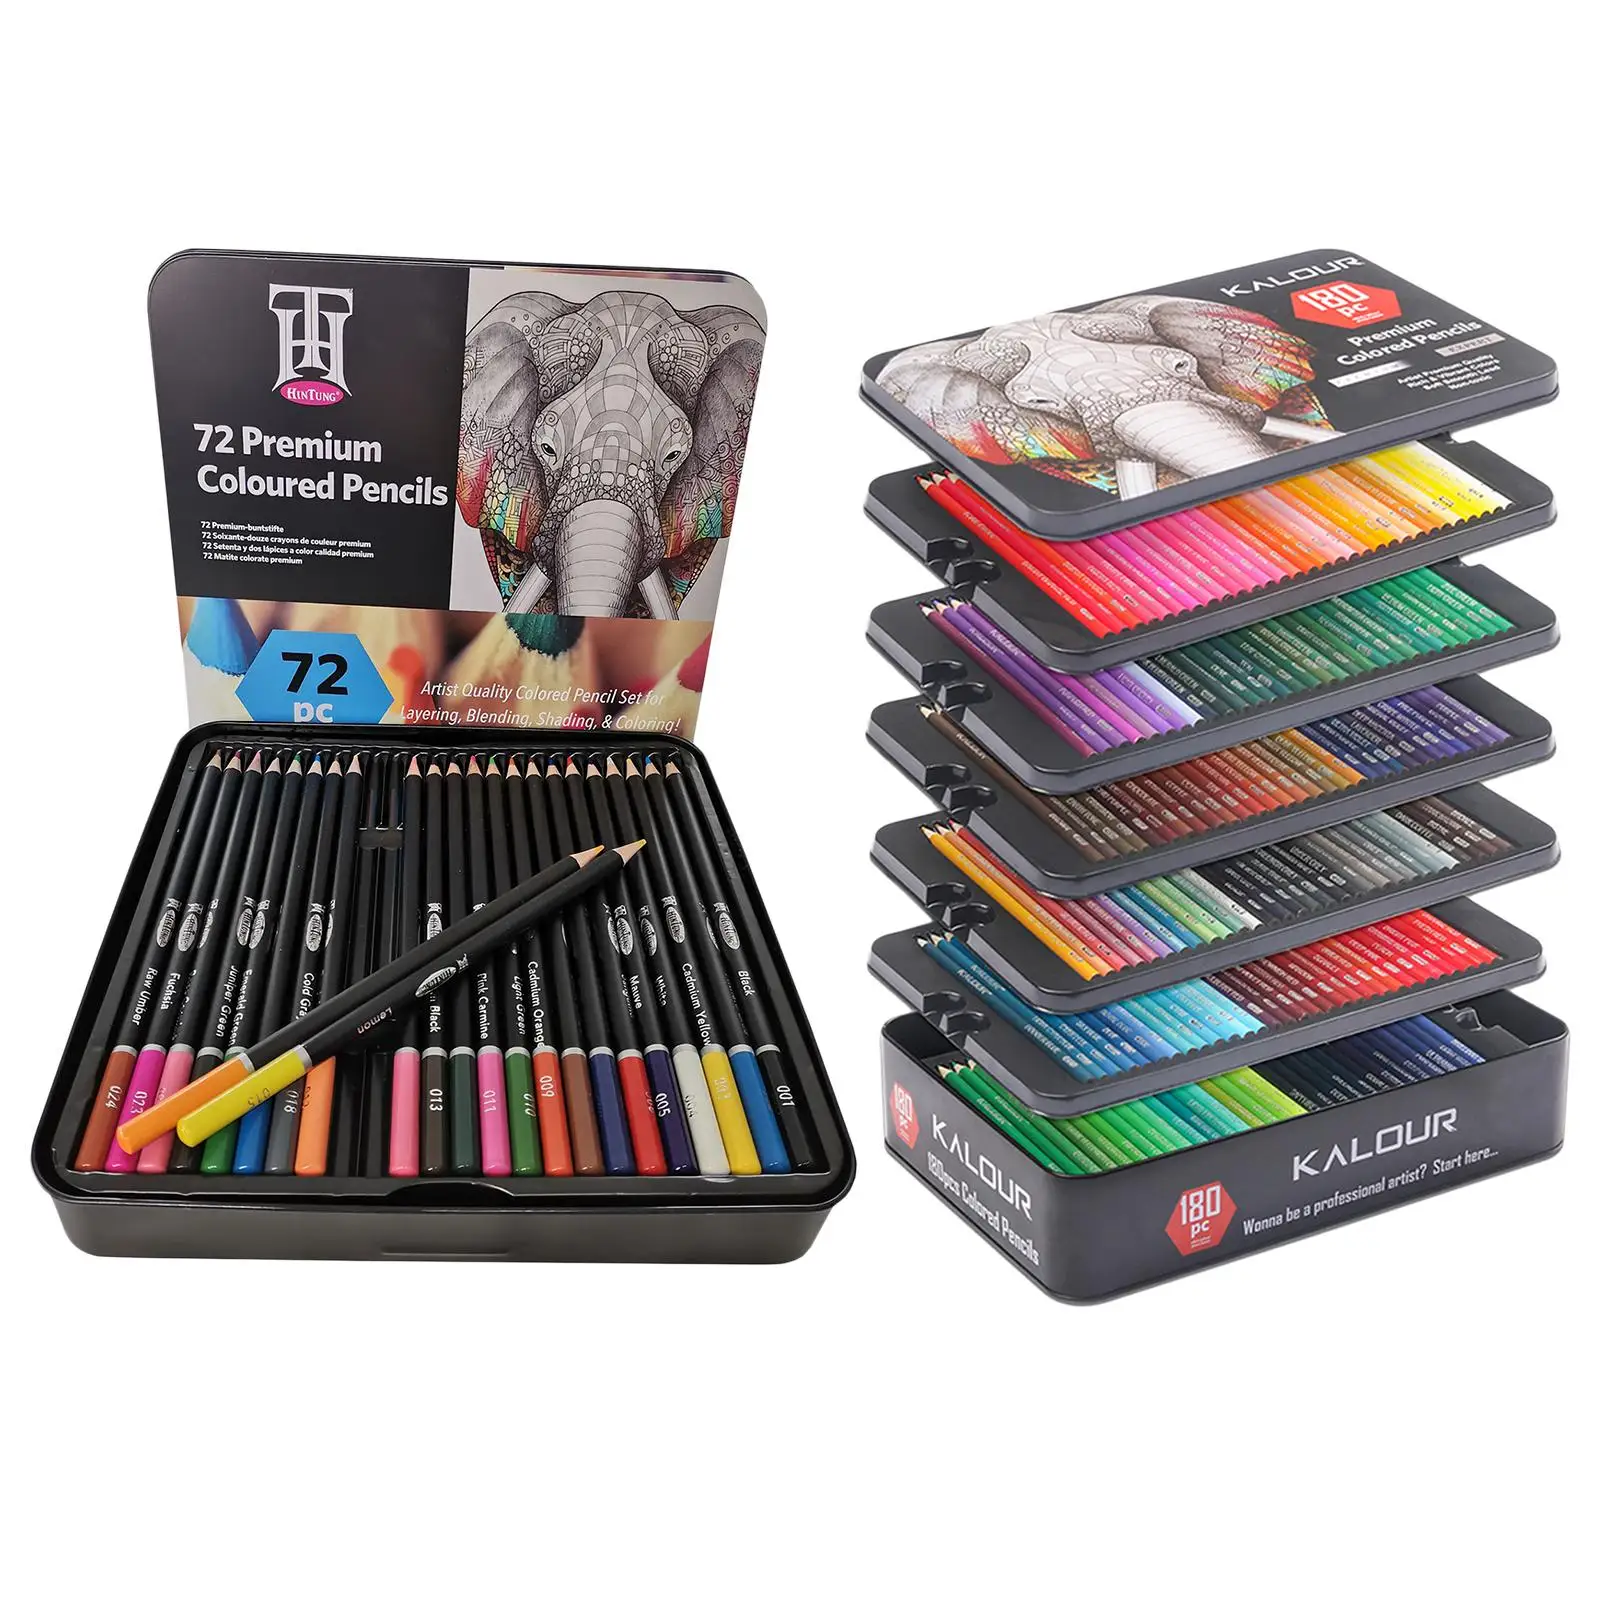 Colored Pencils with Storage Box, Assorted Colors, Professional Art Colouring Pencils for Kids Adults Artist Drawing Sketching